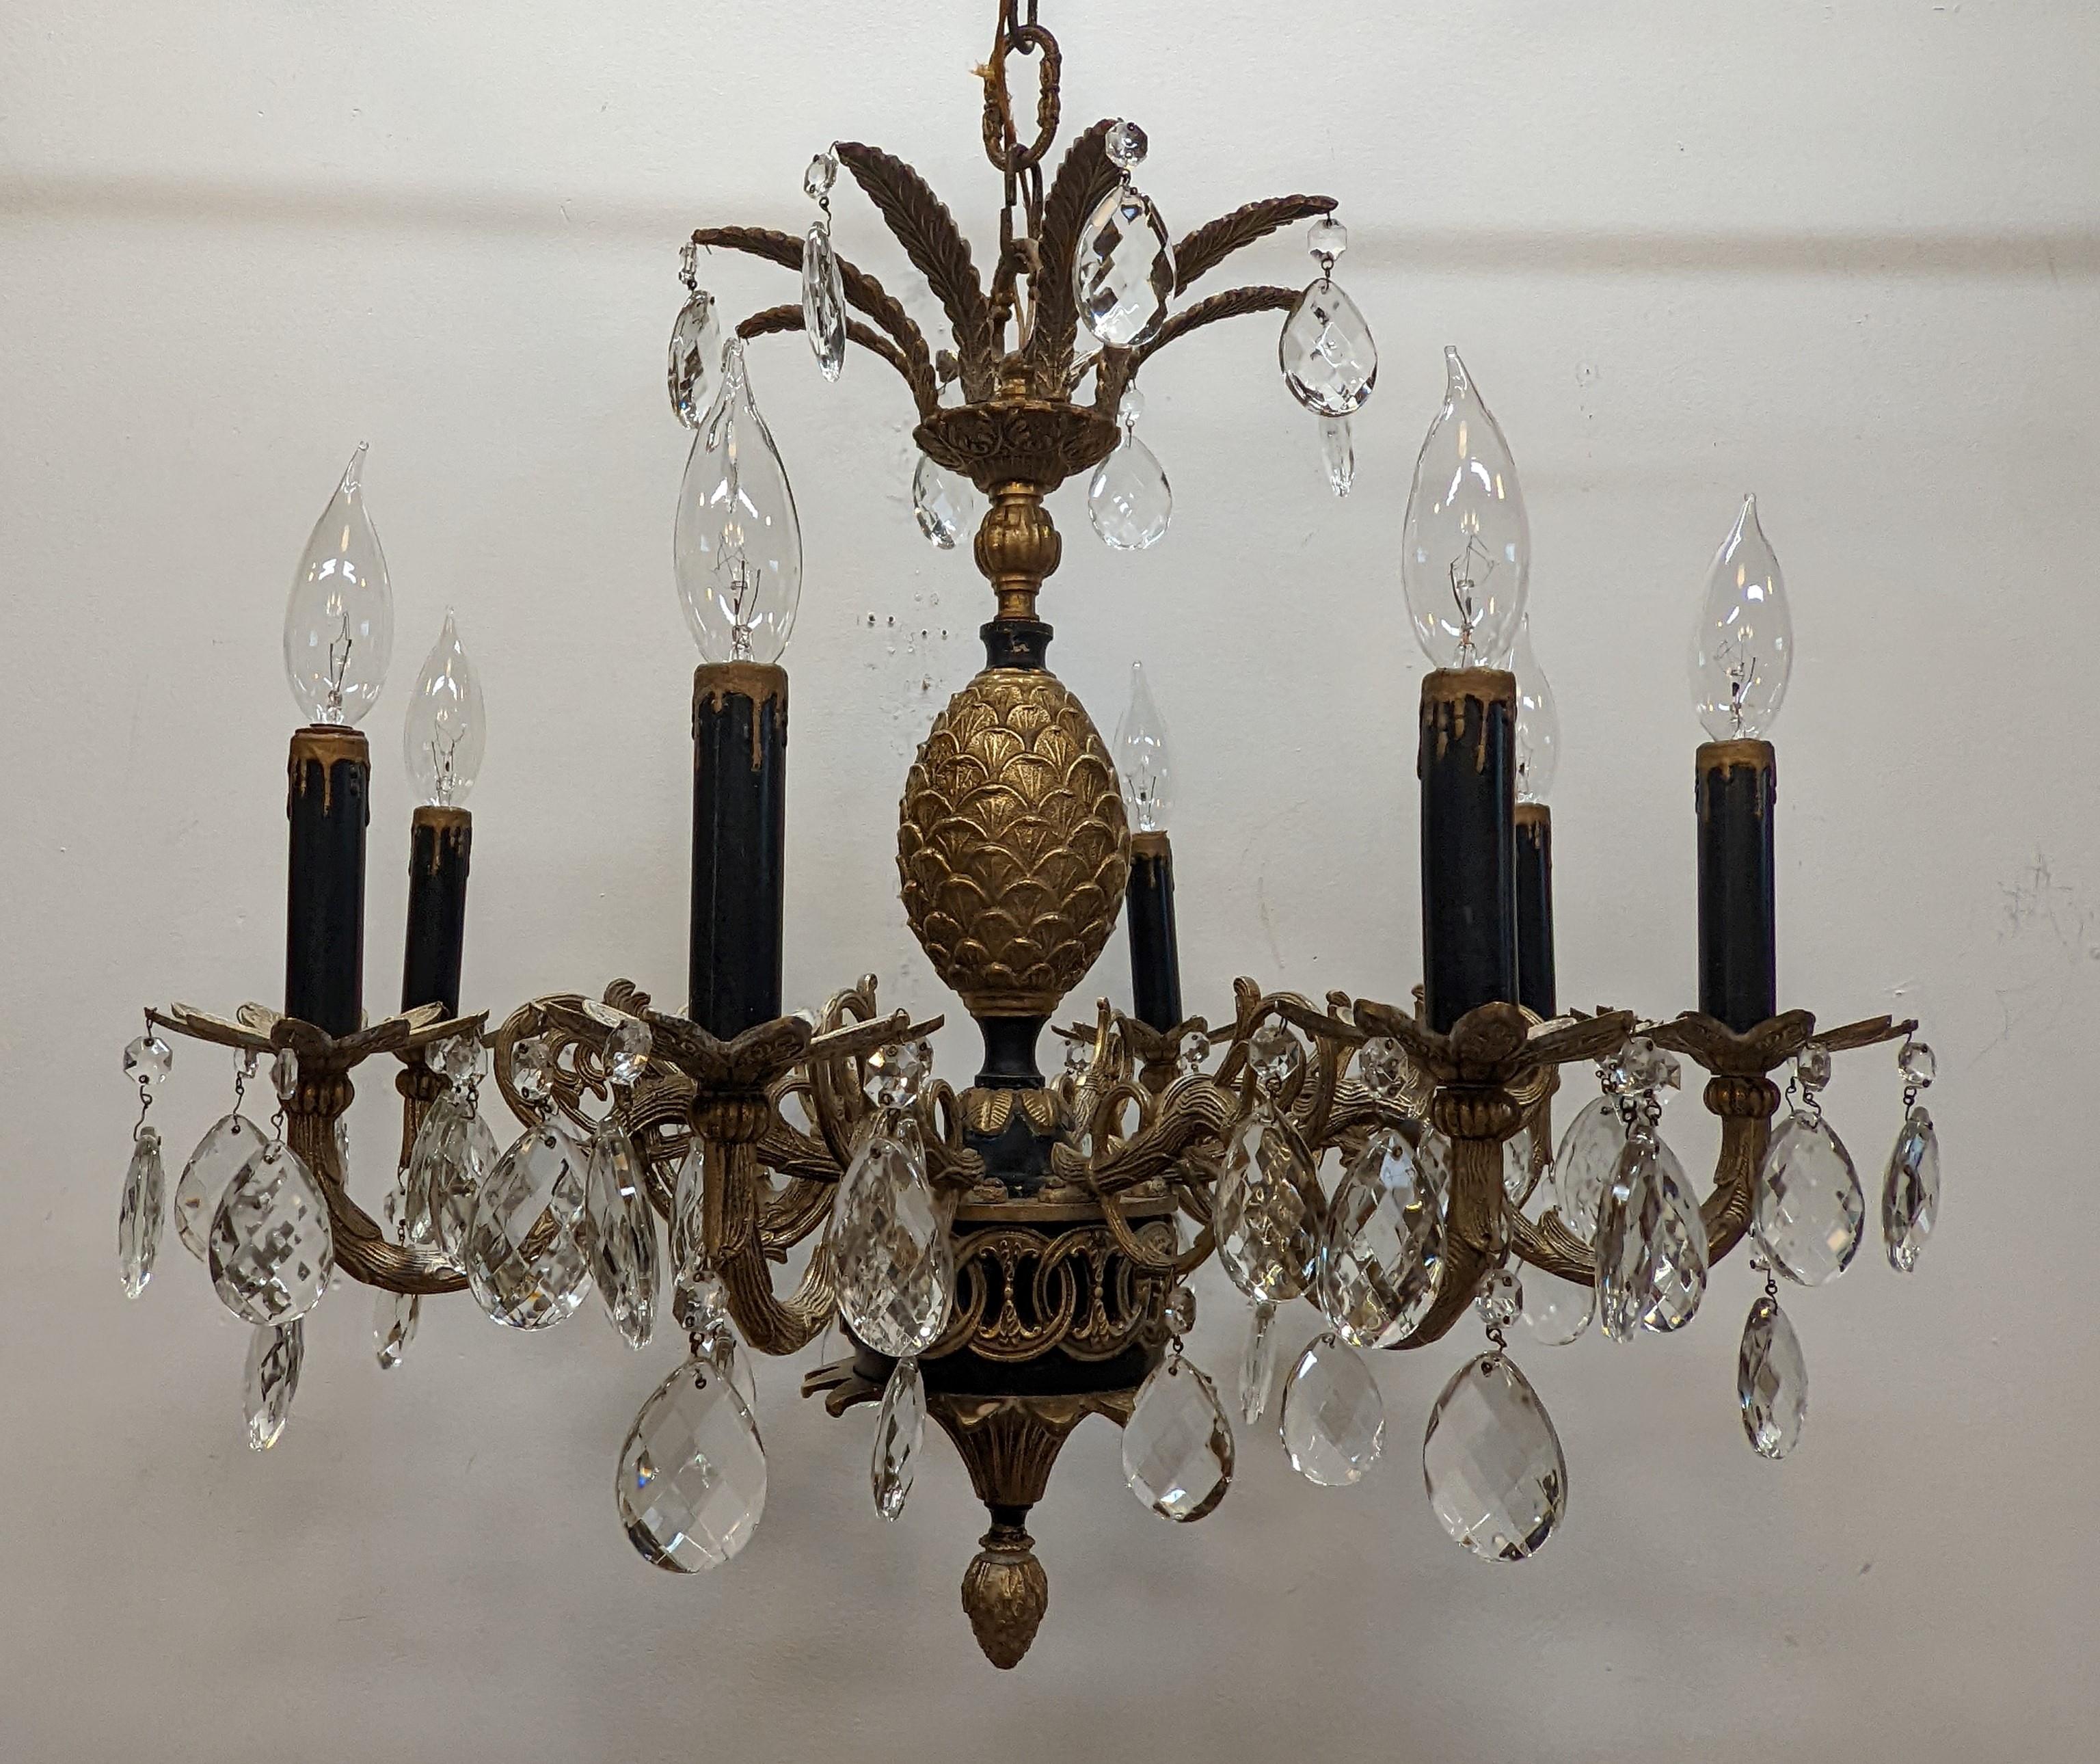 Mid-century Regency Pineapple chandelier of high quality. Hollywood Regency chandelier stylized pineapple design of detailed solid bronze and brass. Eight branches with florets housing faux candle canaster lights surrounding a highly detailed